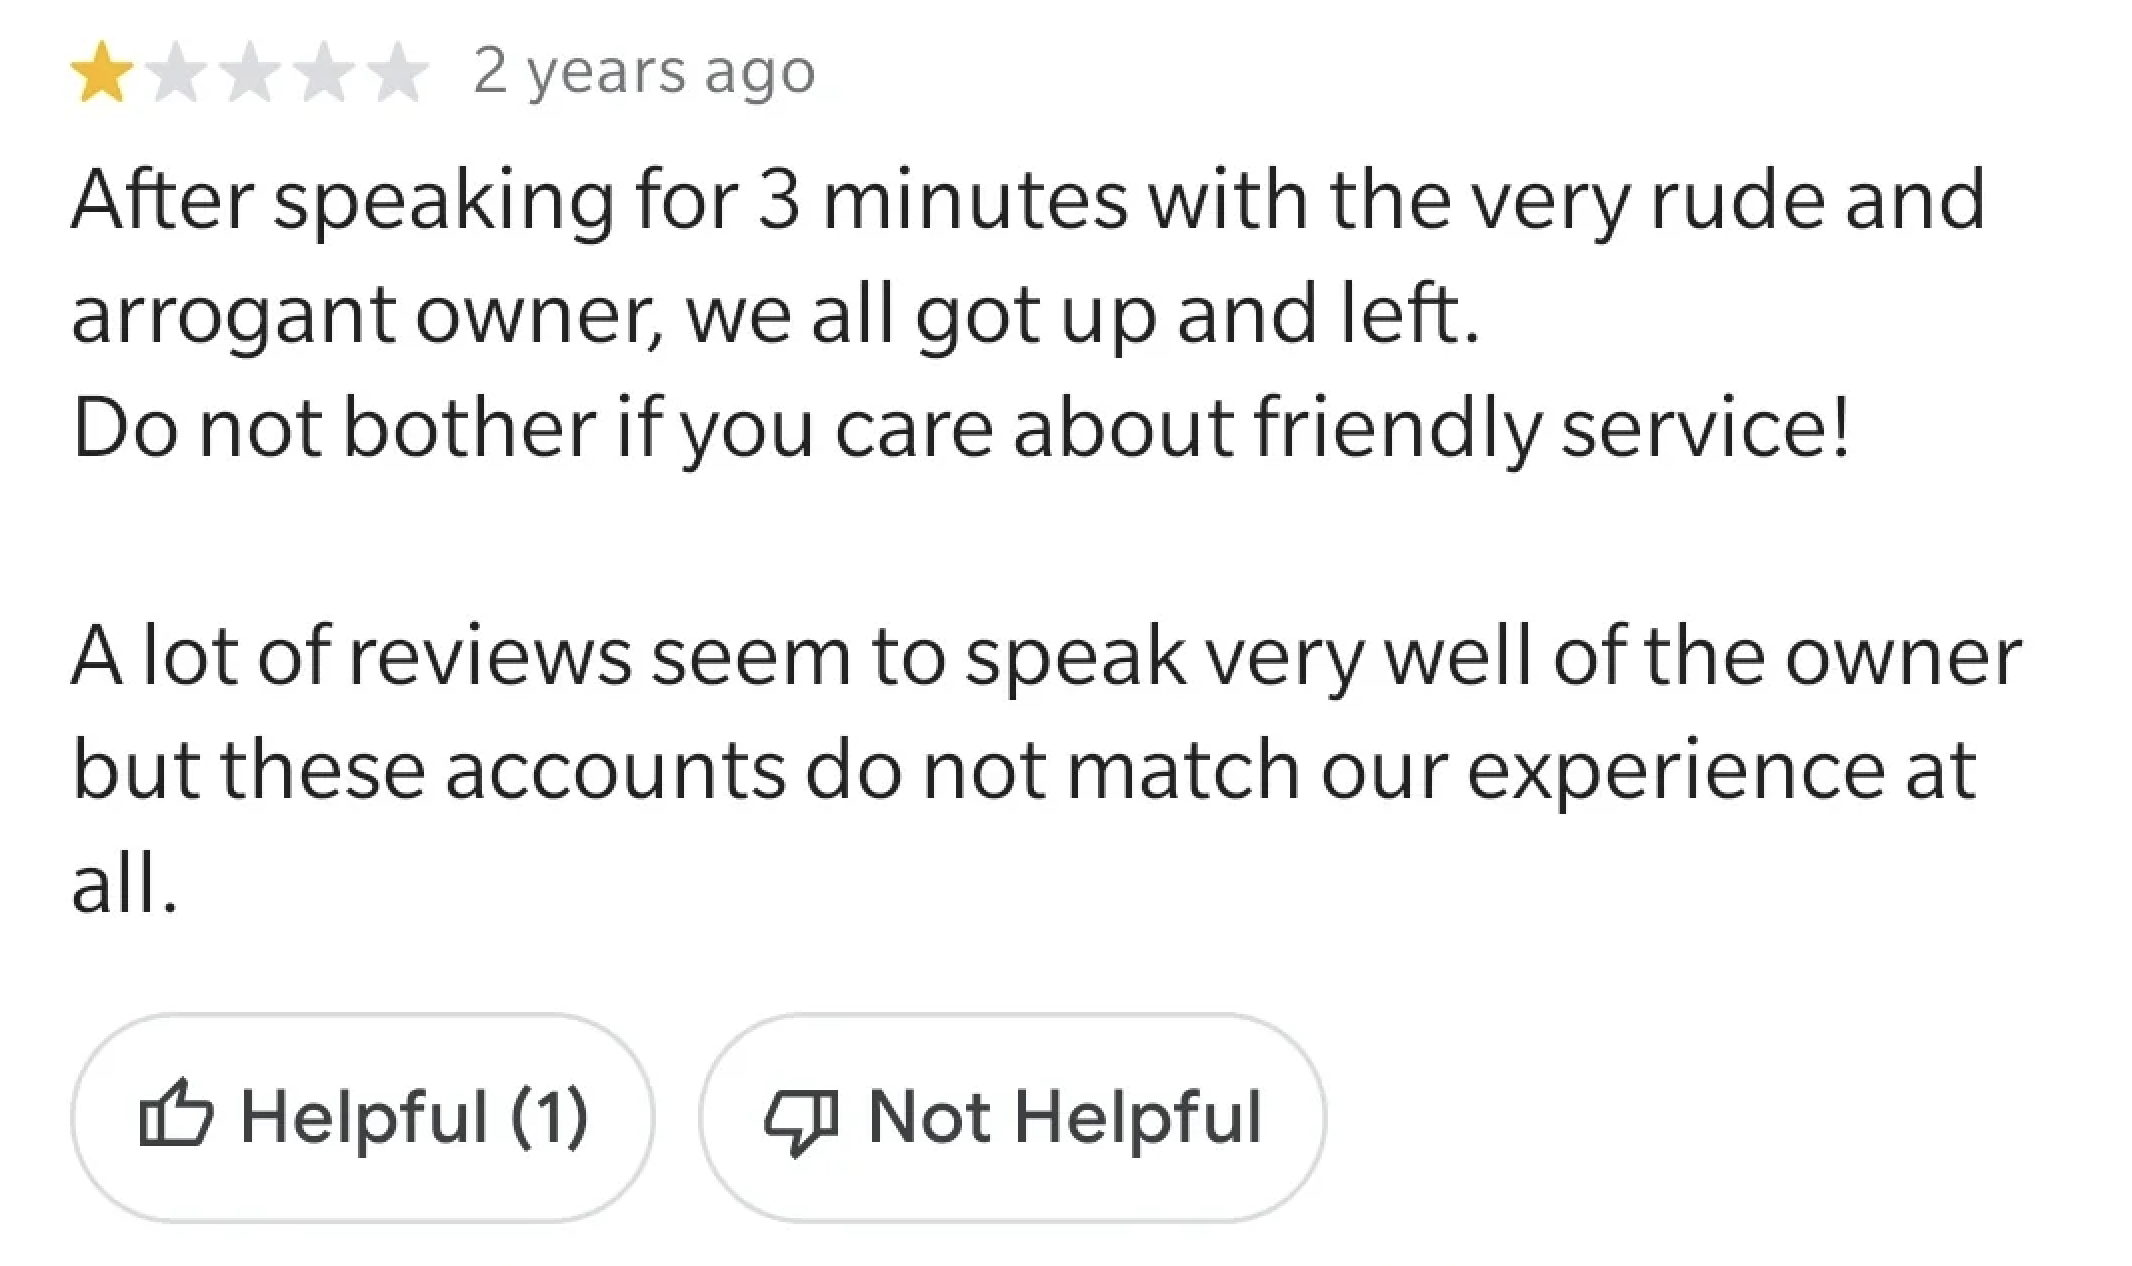 &quot;A lot of reviews seem to speak very well of the owner&quot;